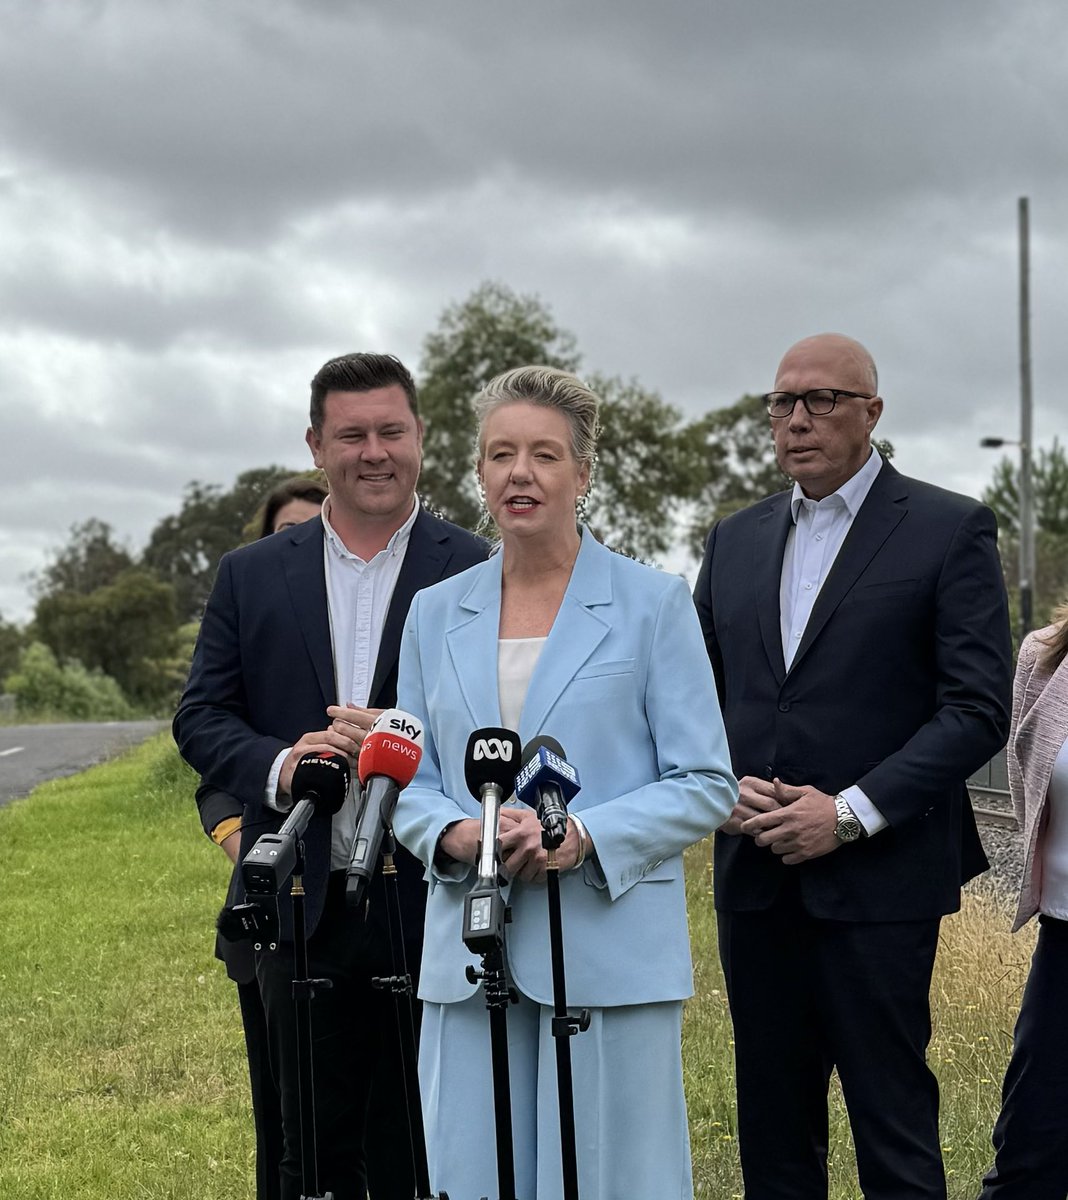 Delivering for Dunkley! This morning I joined Liberal candidate for Dunkley, Nathan Conroy and @PeterDutton_MP to announce a future Federal Coalition Government will commit $900 million to upgrade the Frankston to Baxter Rail Line project. An absolute game-changer for